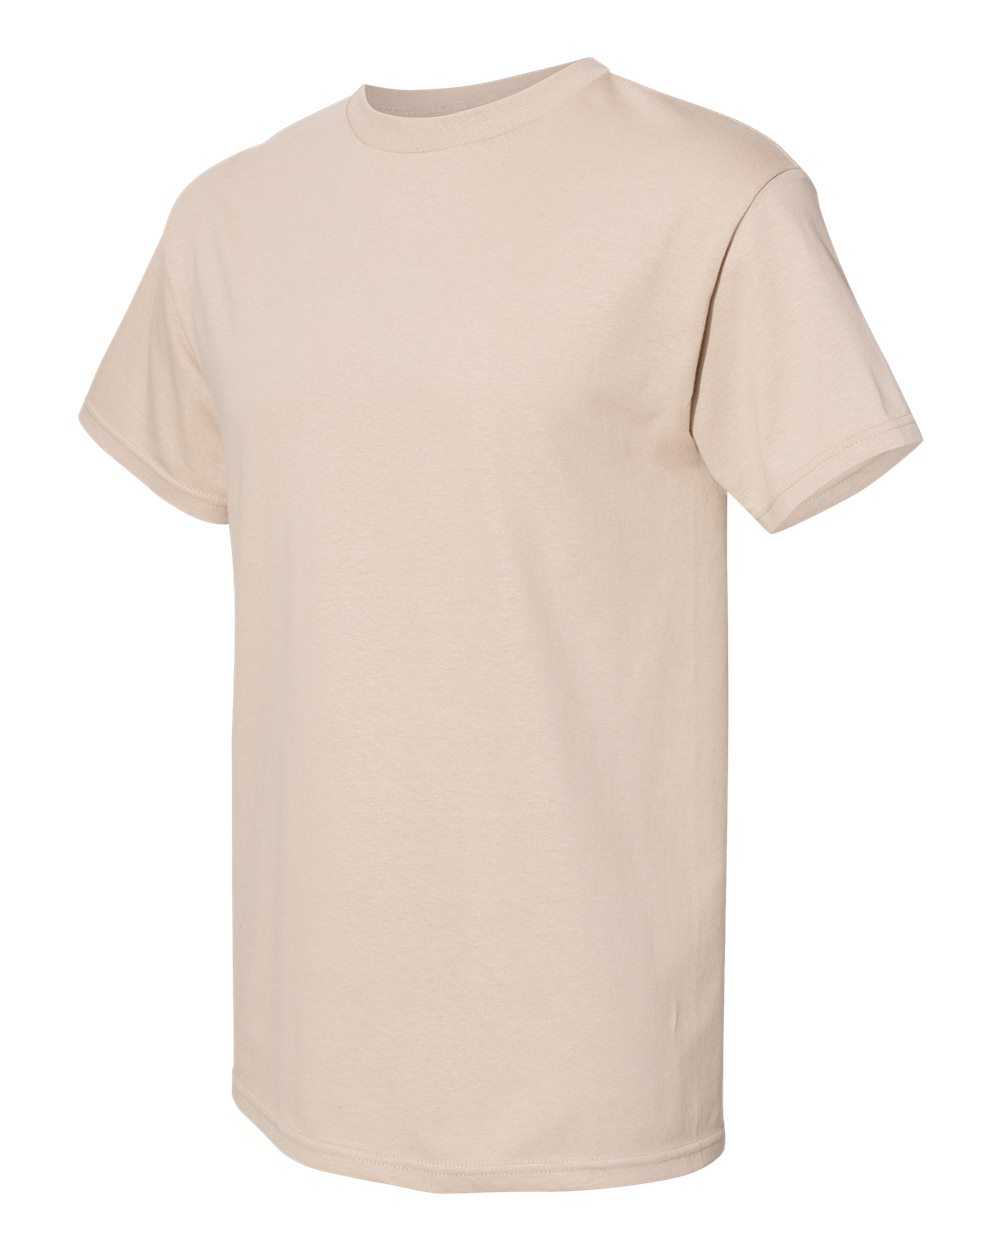 Alstyle 1901 Heavyweight Adult Tee - Sand - HIT a Double